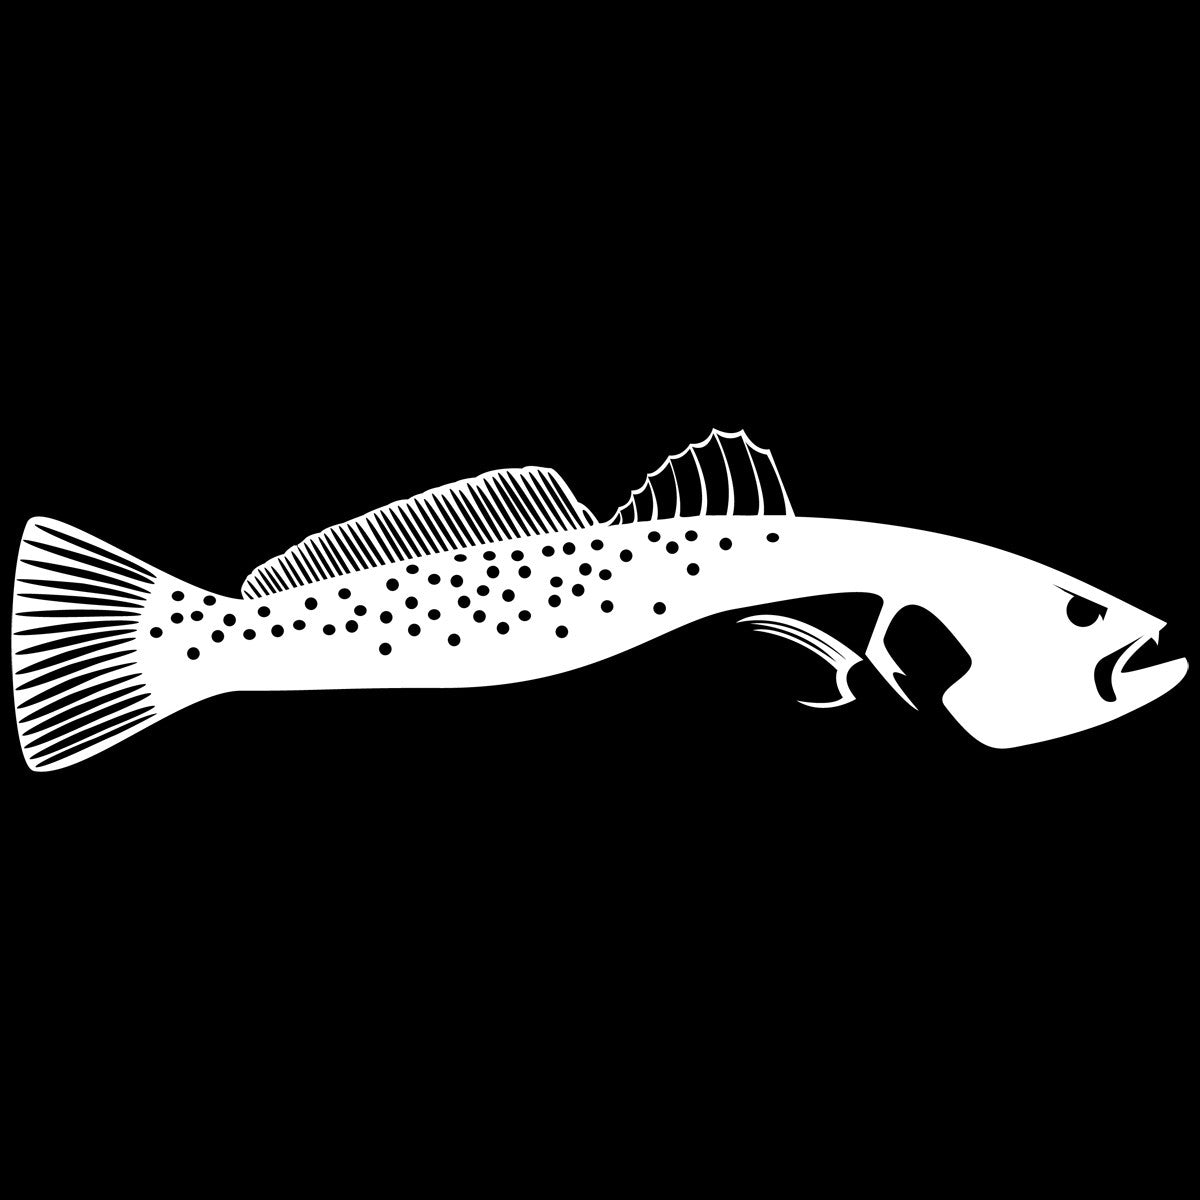  Speckled/Sea Trout Fish Ruler Decals for Your Boat, Kayak, Ice  Chest, Etc. (Dark Green, 20 inch) : Sports & Outdoors